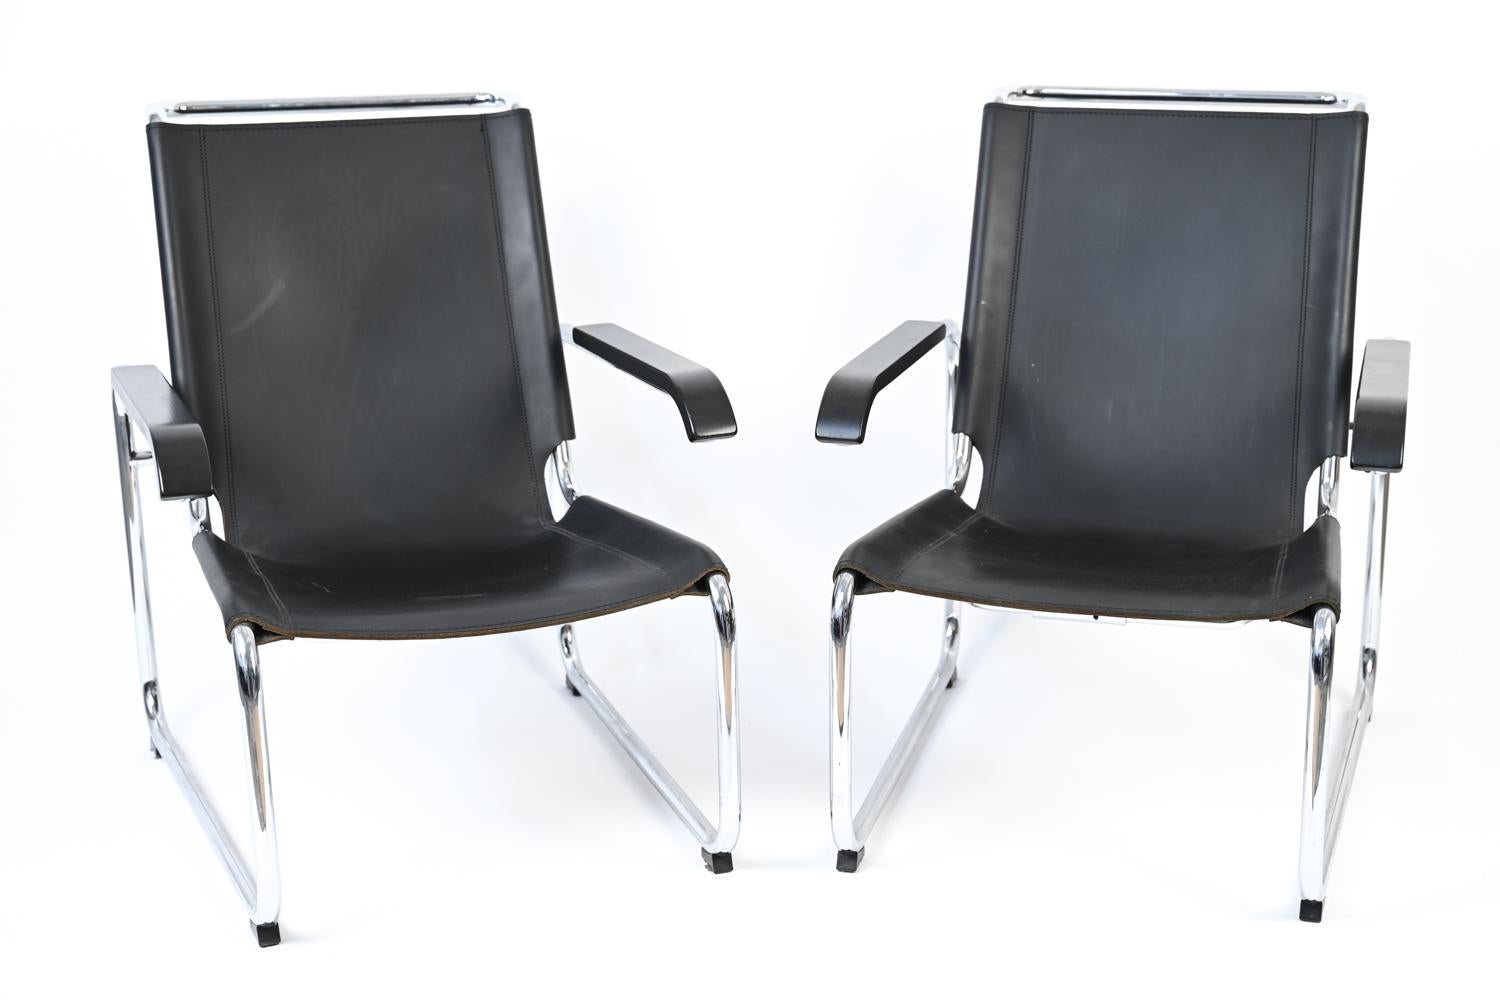 This pair of iconic S 35 lounge chairs features heavy-duty black leather seats slung over tubular polished chrome frames, with black stained beechwood armrests and foot glides for protection. 

In design, there is no greater endorsement than the